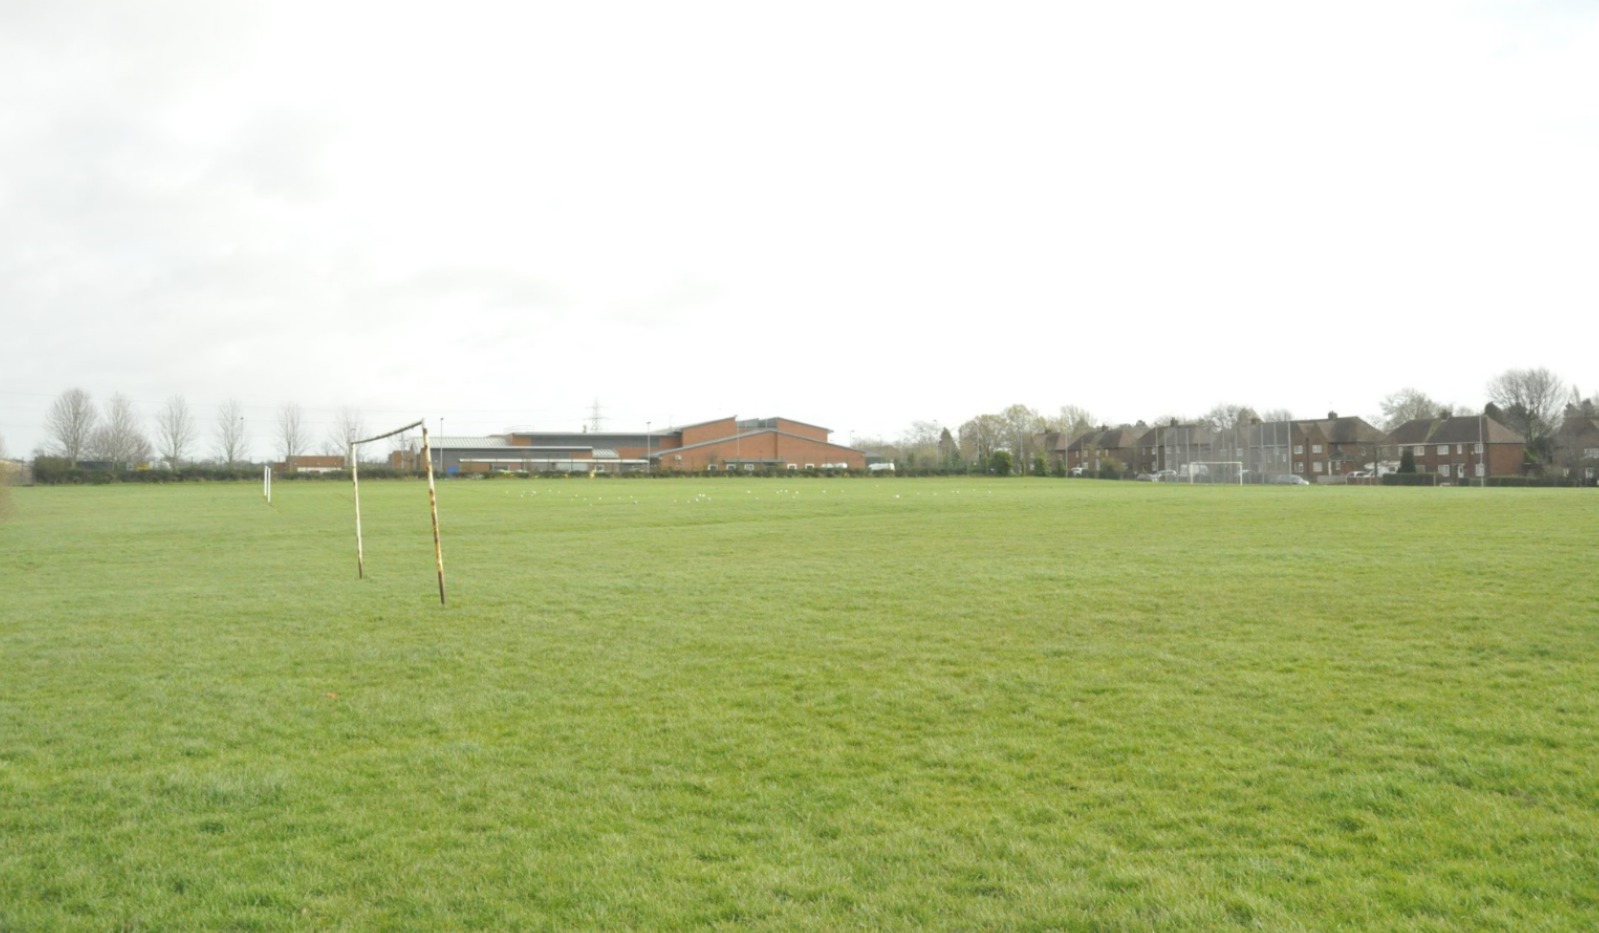 The £125k grant will see the improvement works at King George V Playing Fields in Blacon.